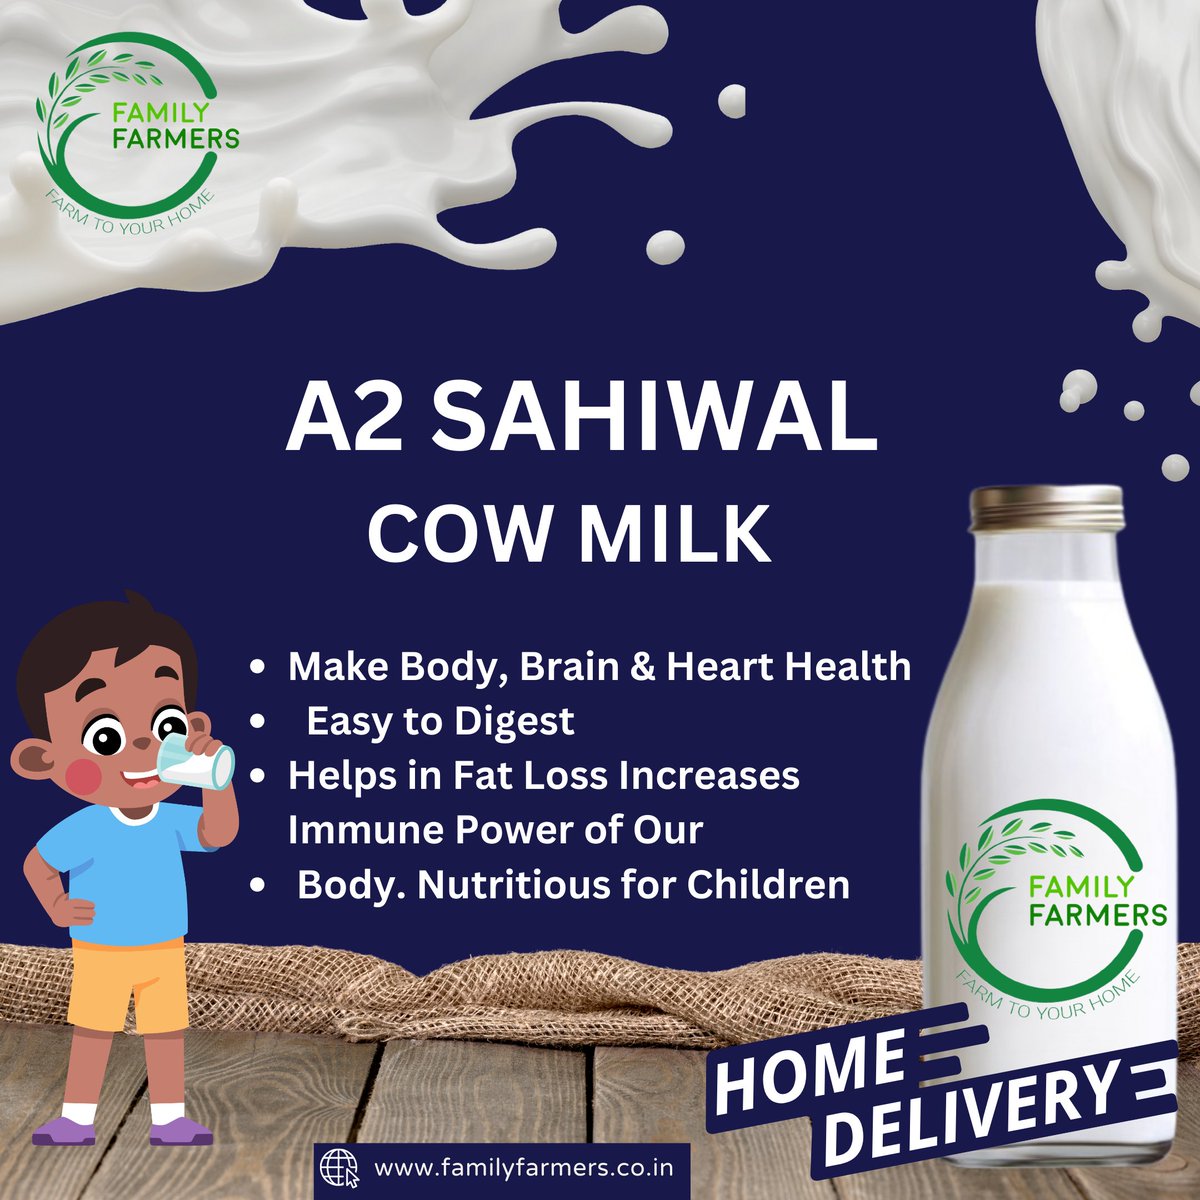 We bring you sahiwal Cow Milk which is pure love from happy sahiwal cows.

#familyfarmers #sahiwalcow  #a2milk #a2milkindia #homedilevry #homedeliveryservice